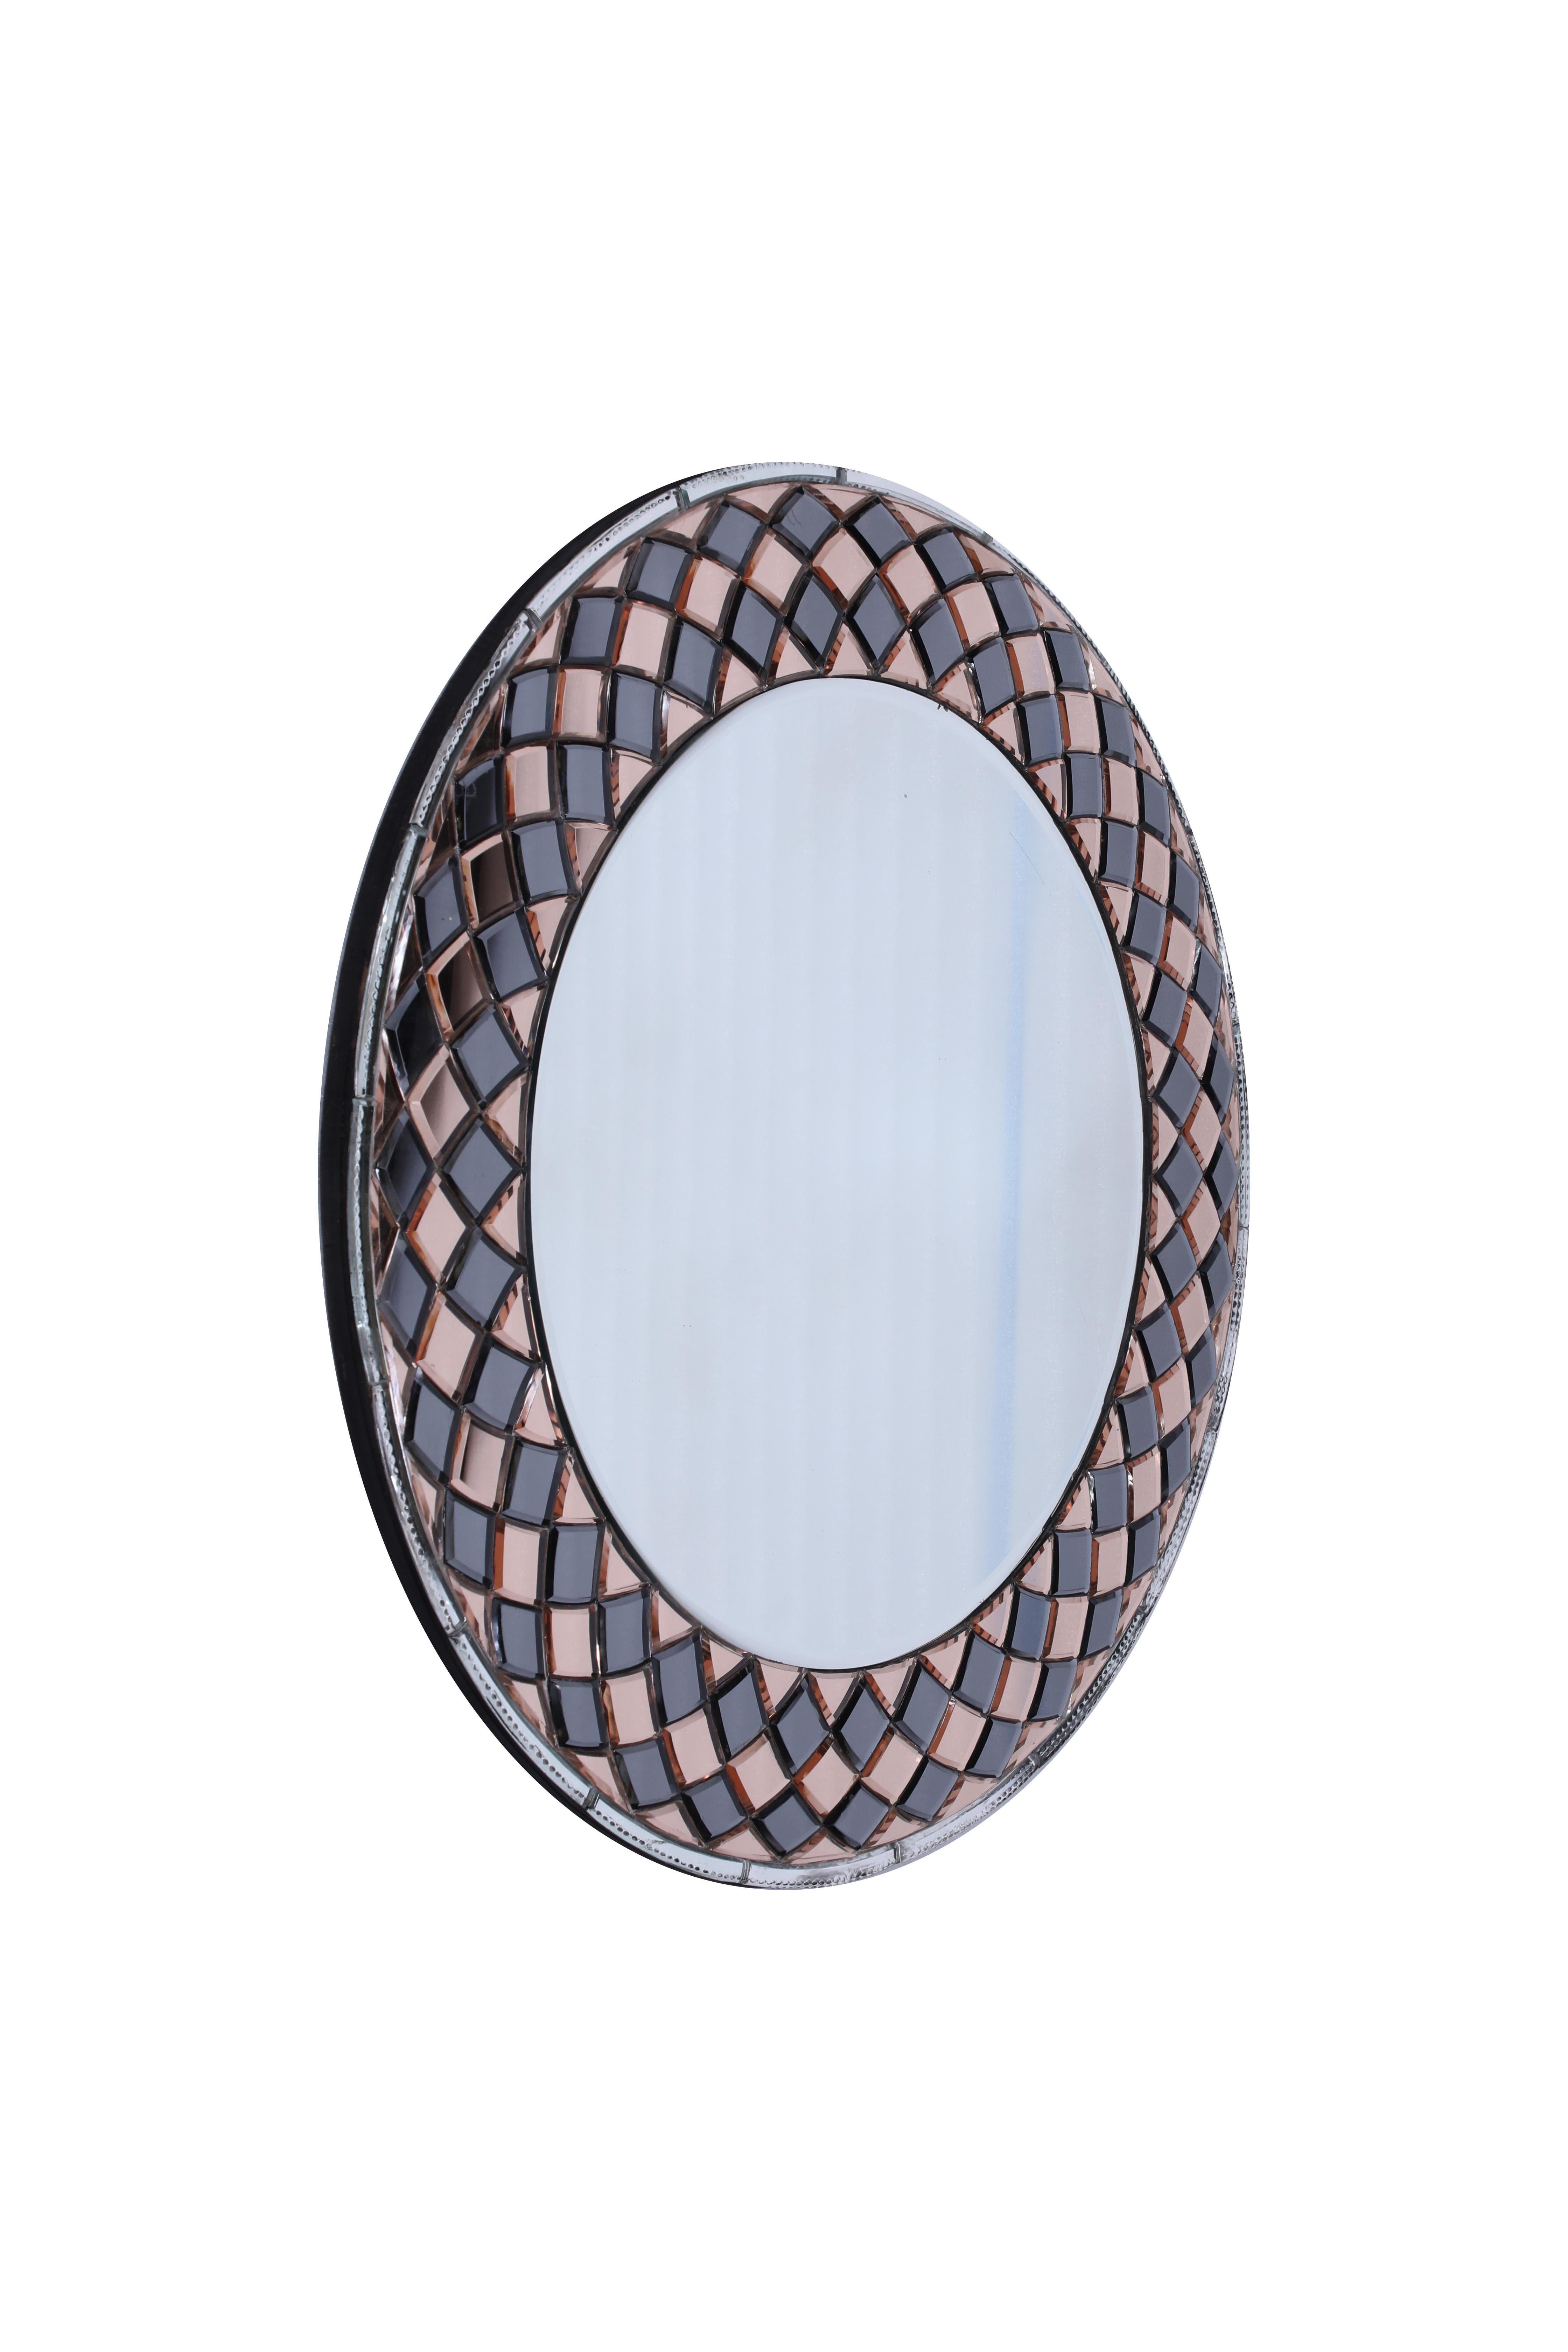 Rose and Smoked Glass Harlequin Design Round Mirror In Good Condition For Sale In Nantucket, MA